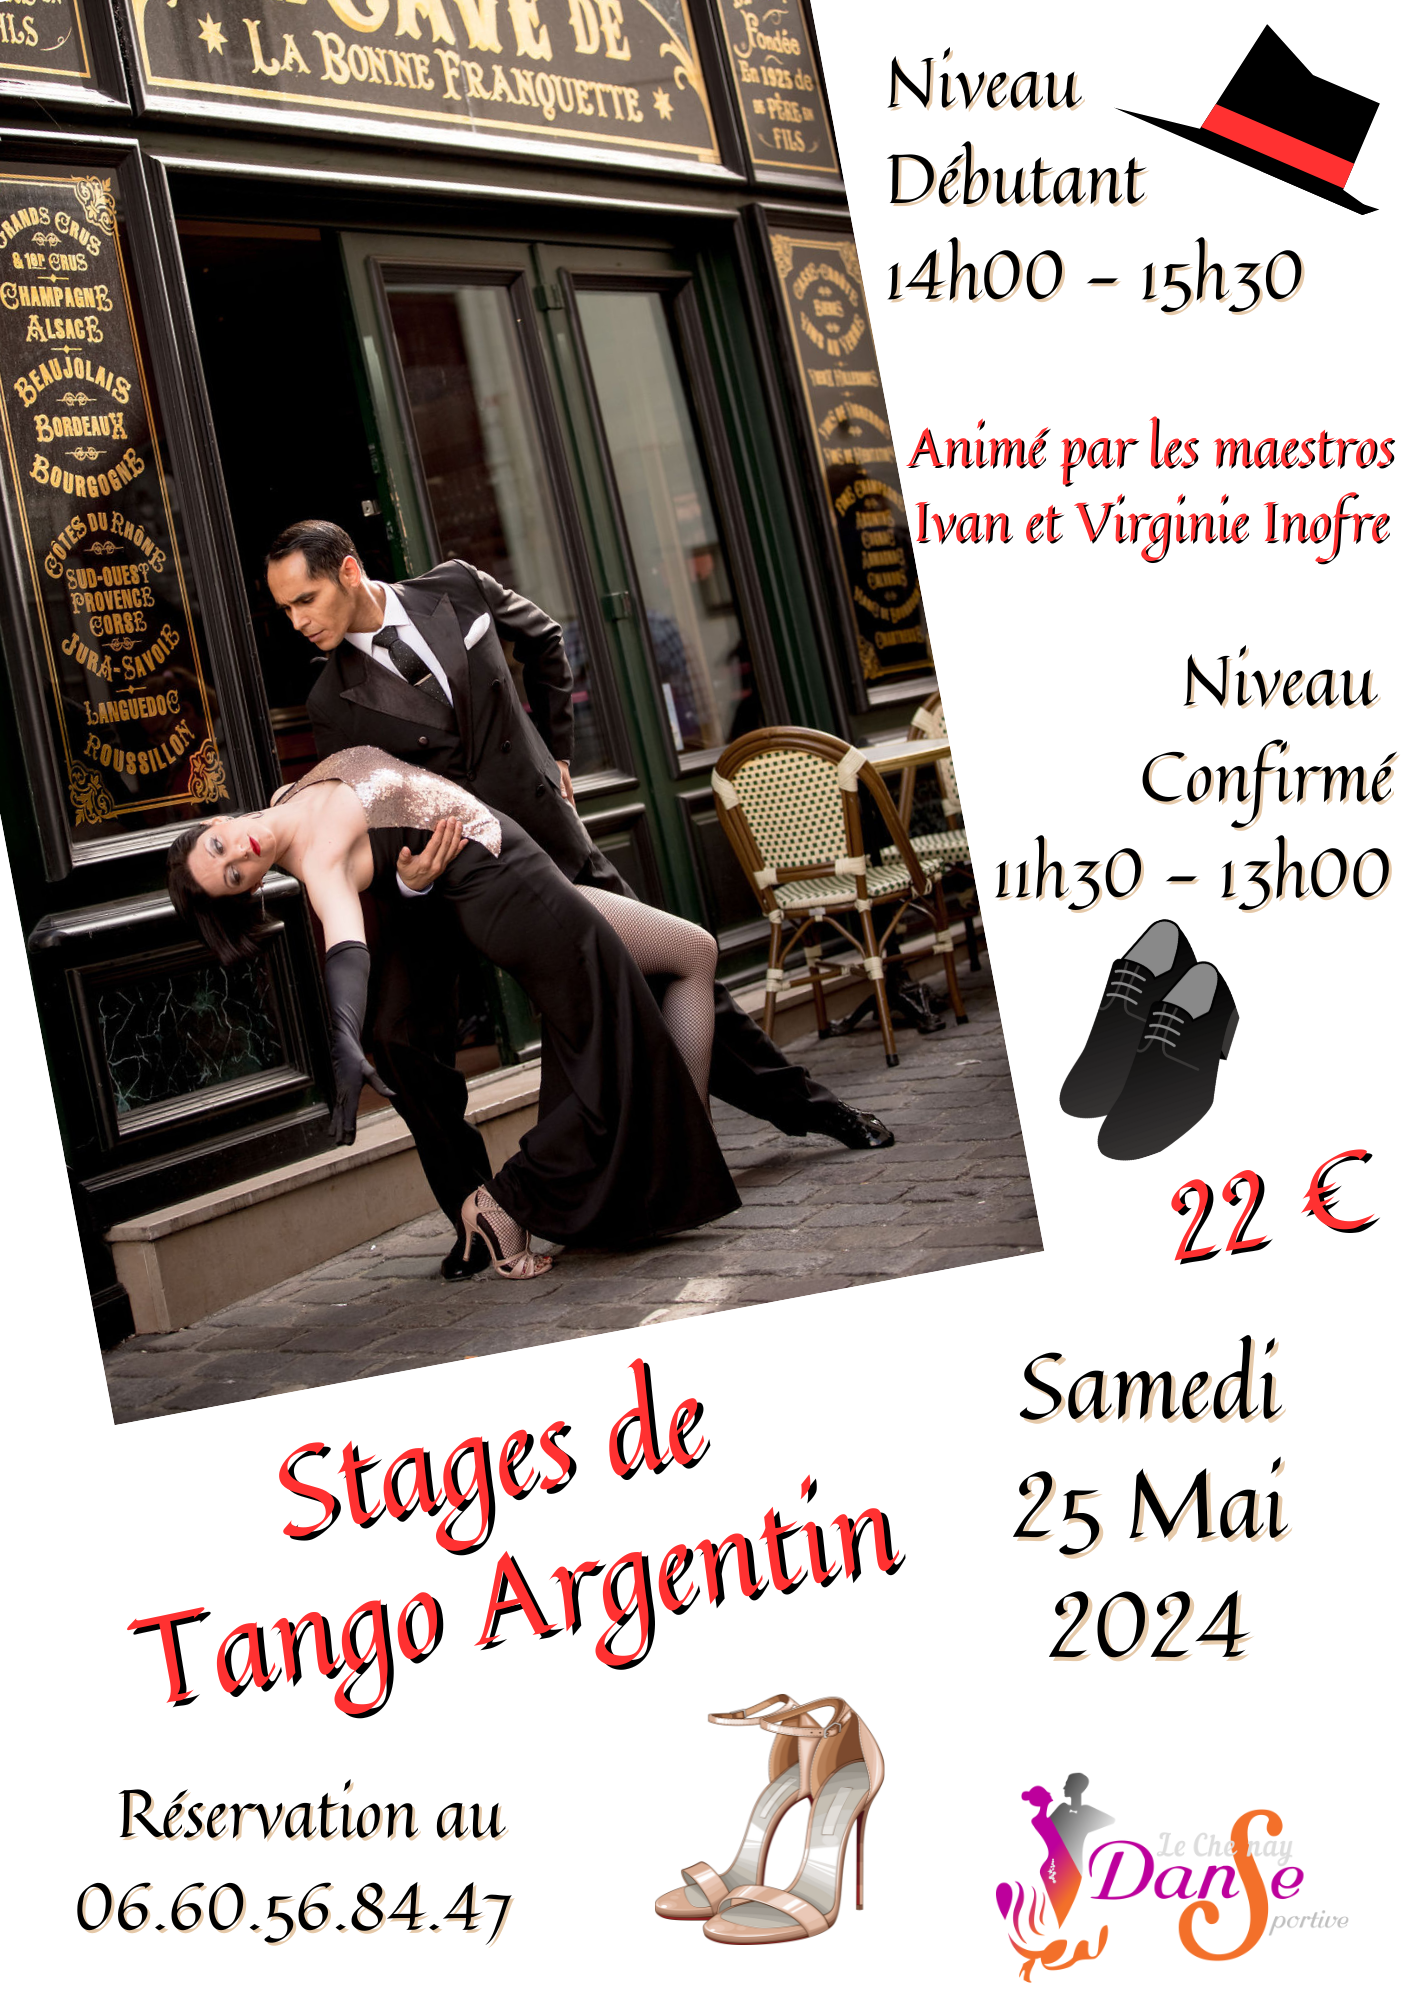 You are currently viewing Tango Argentin 25/05/2024